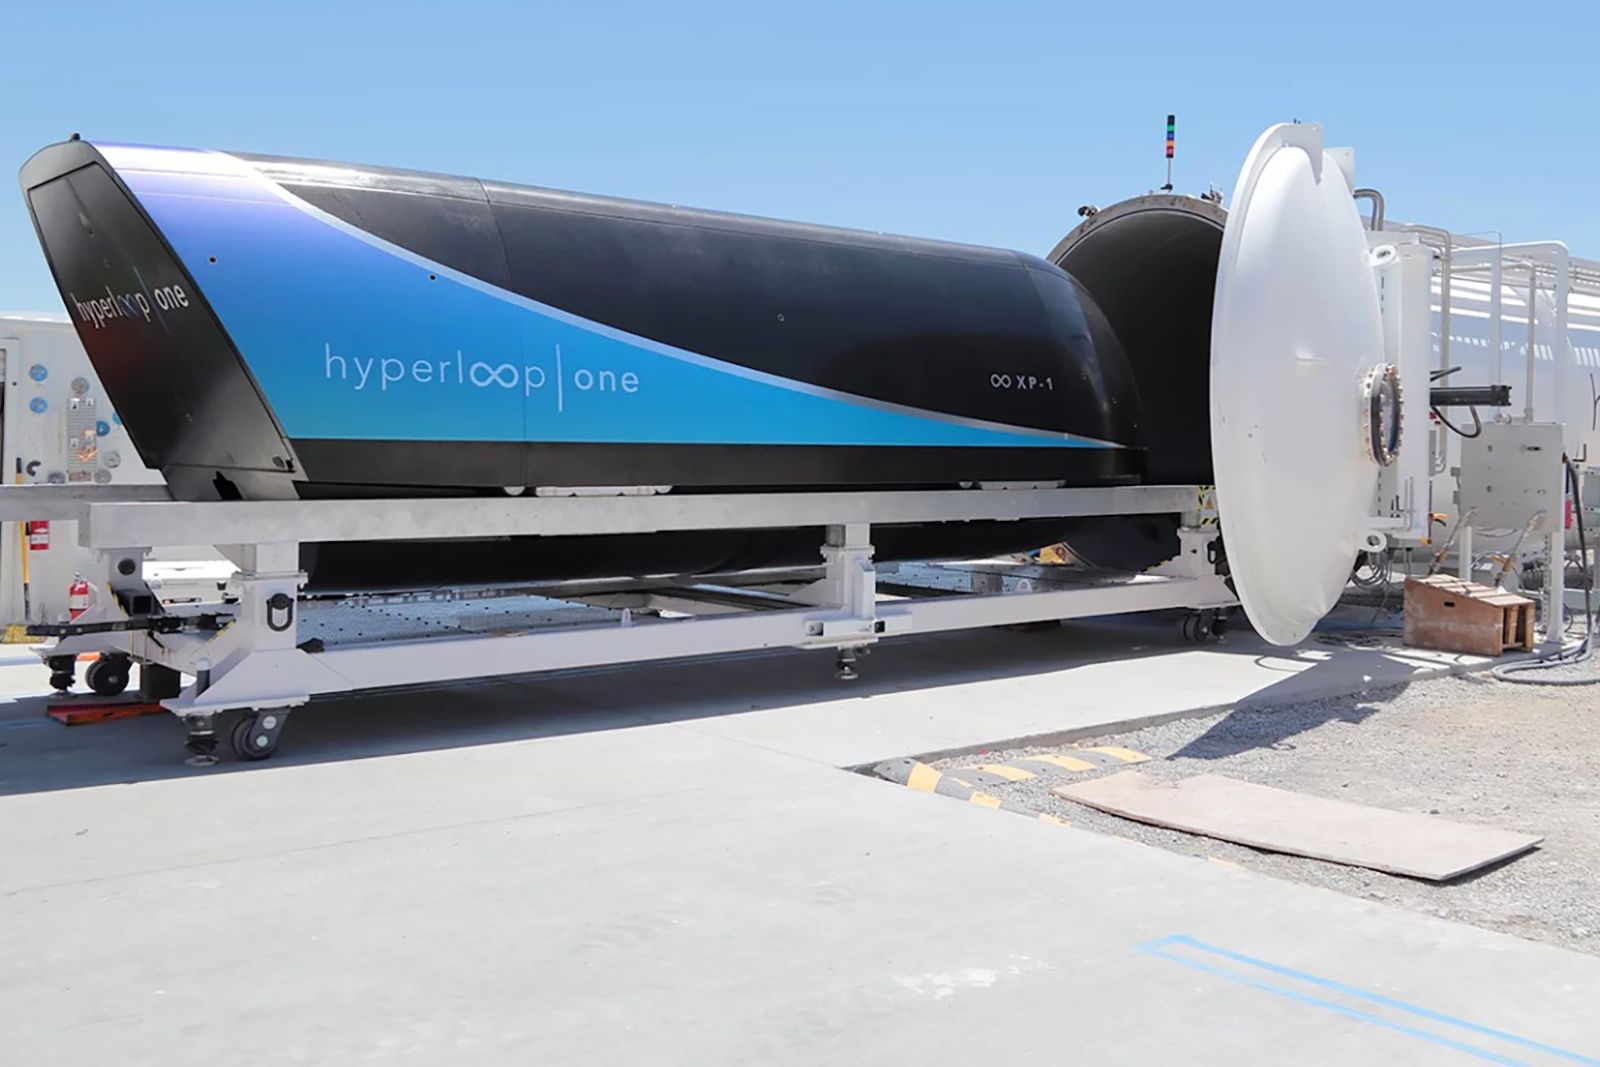 What Is Hyperloop The 700mph Subsonic Train Explained image 8